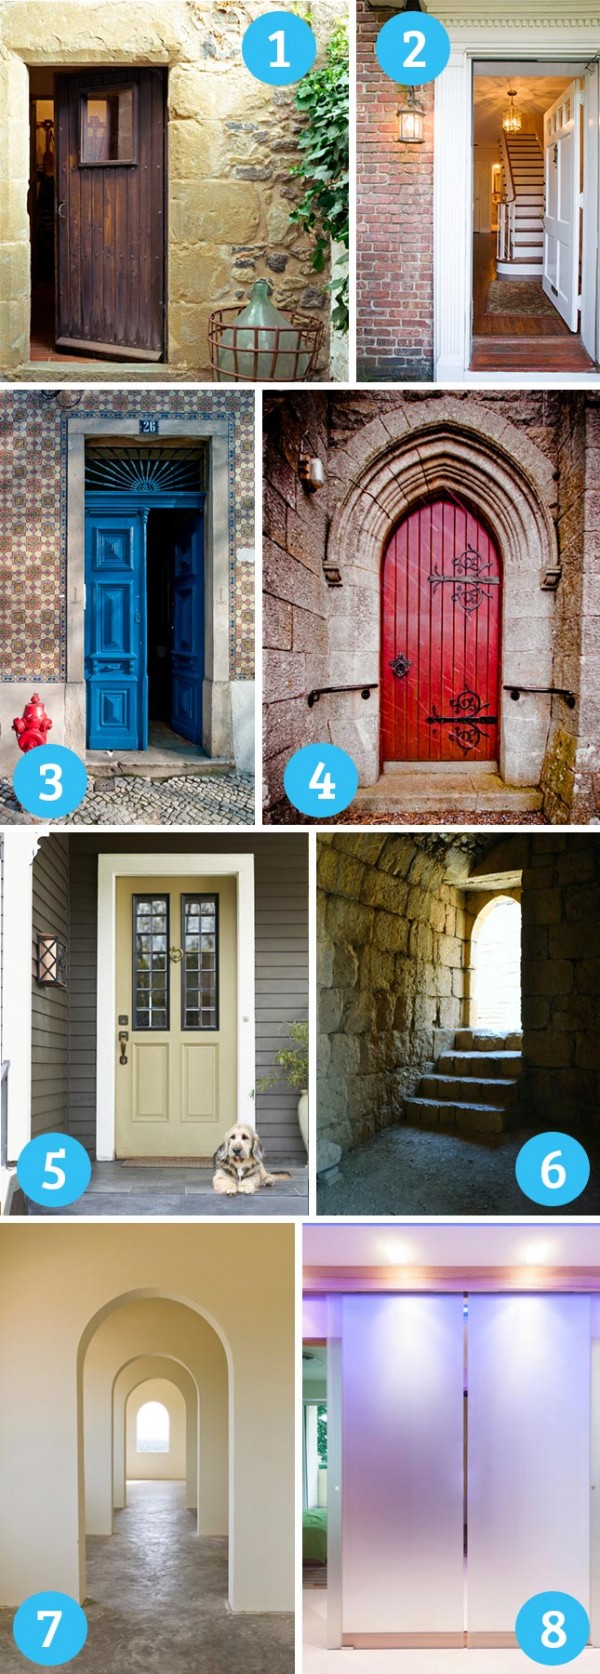 Go ahead and pick which door you would like step through, then keep scrolling down.